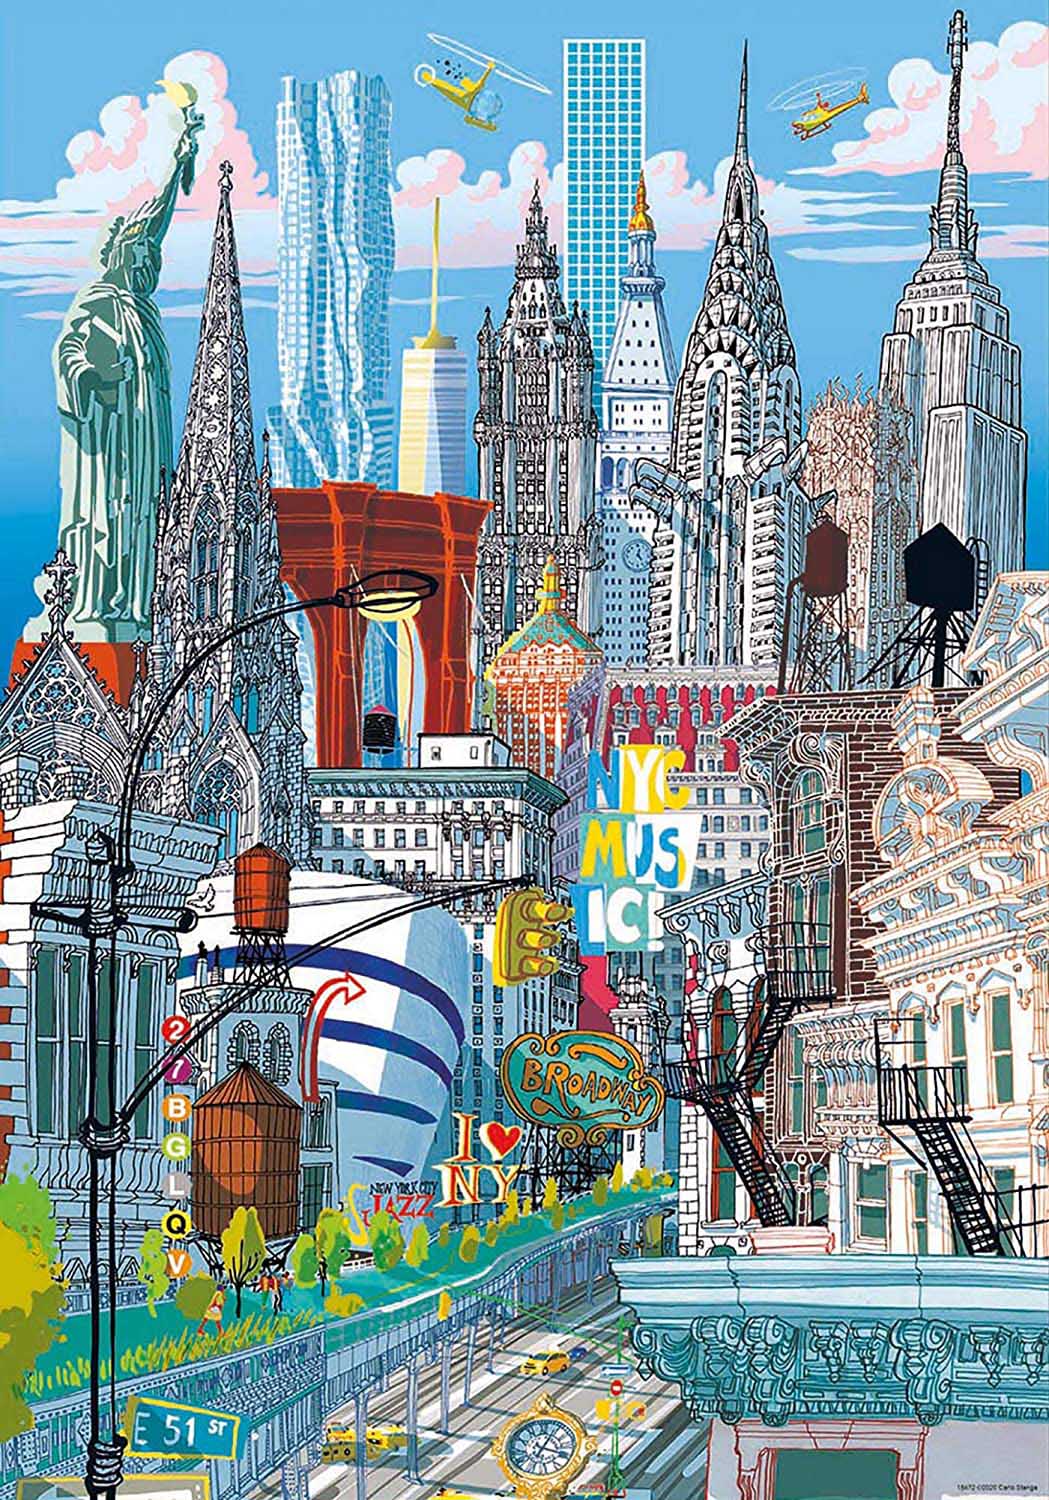 Educa City Puzzle - 200 Pieces - New York » Cheap Shipping